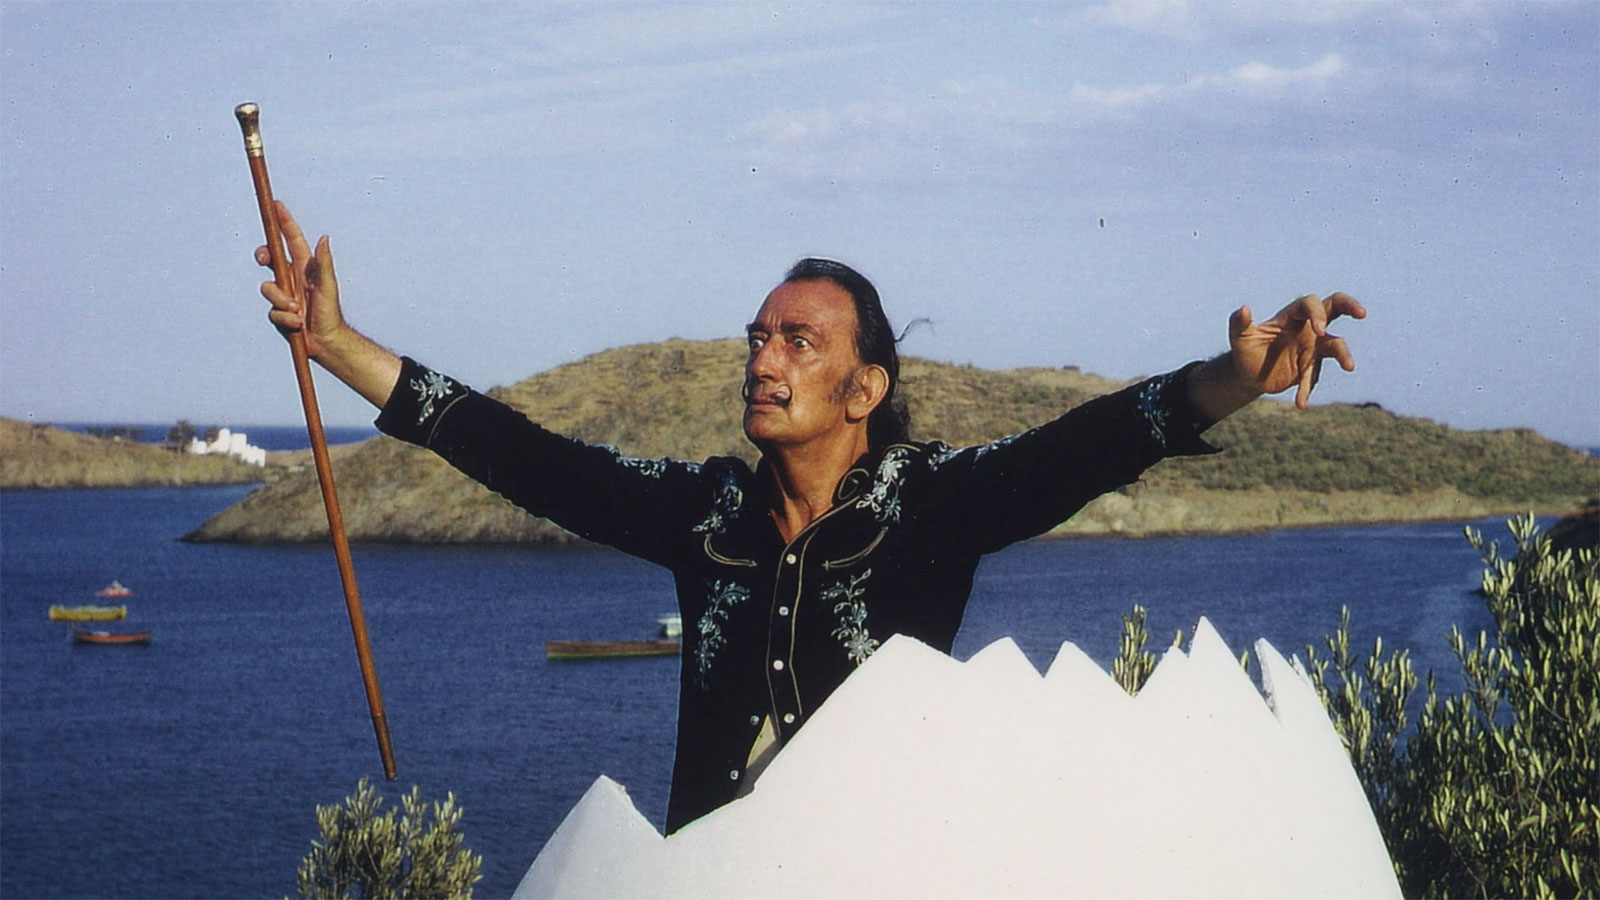 Salvador Dalí In Search of Immortality Northwest Film Forum